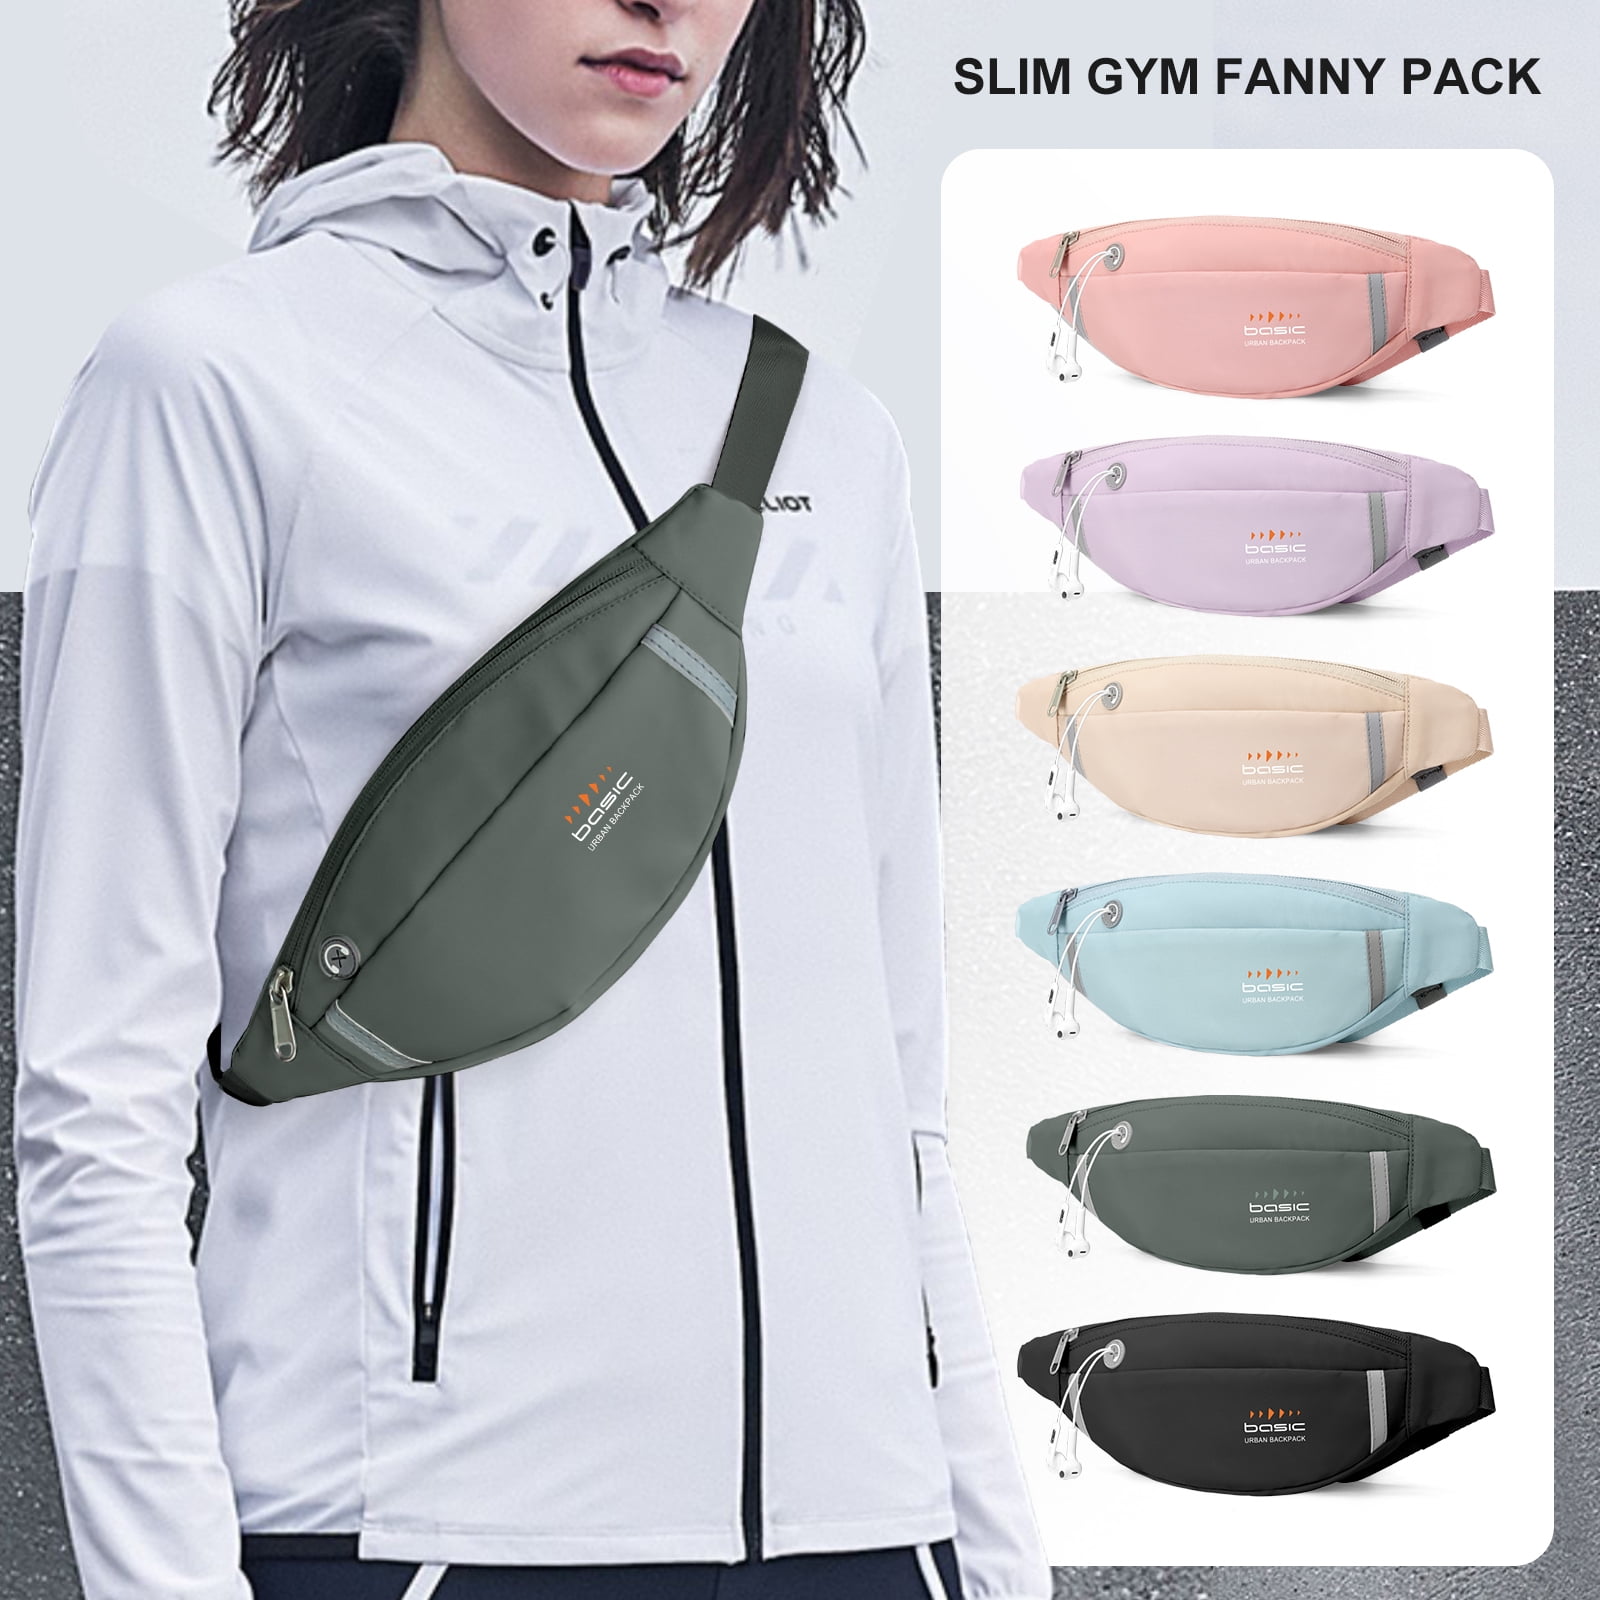 SYCNB Fanny Packs for Women Fashionable Crossbody Bags Belt Bag Multi-Color Waterproof Waist Bag Plus Size Fanny Pack for Men with Headphone Jack for